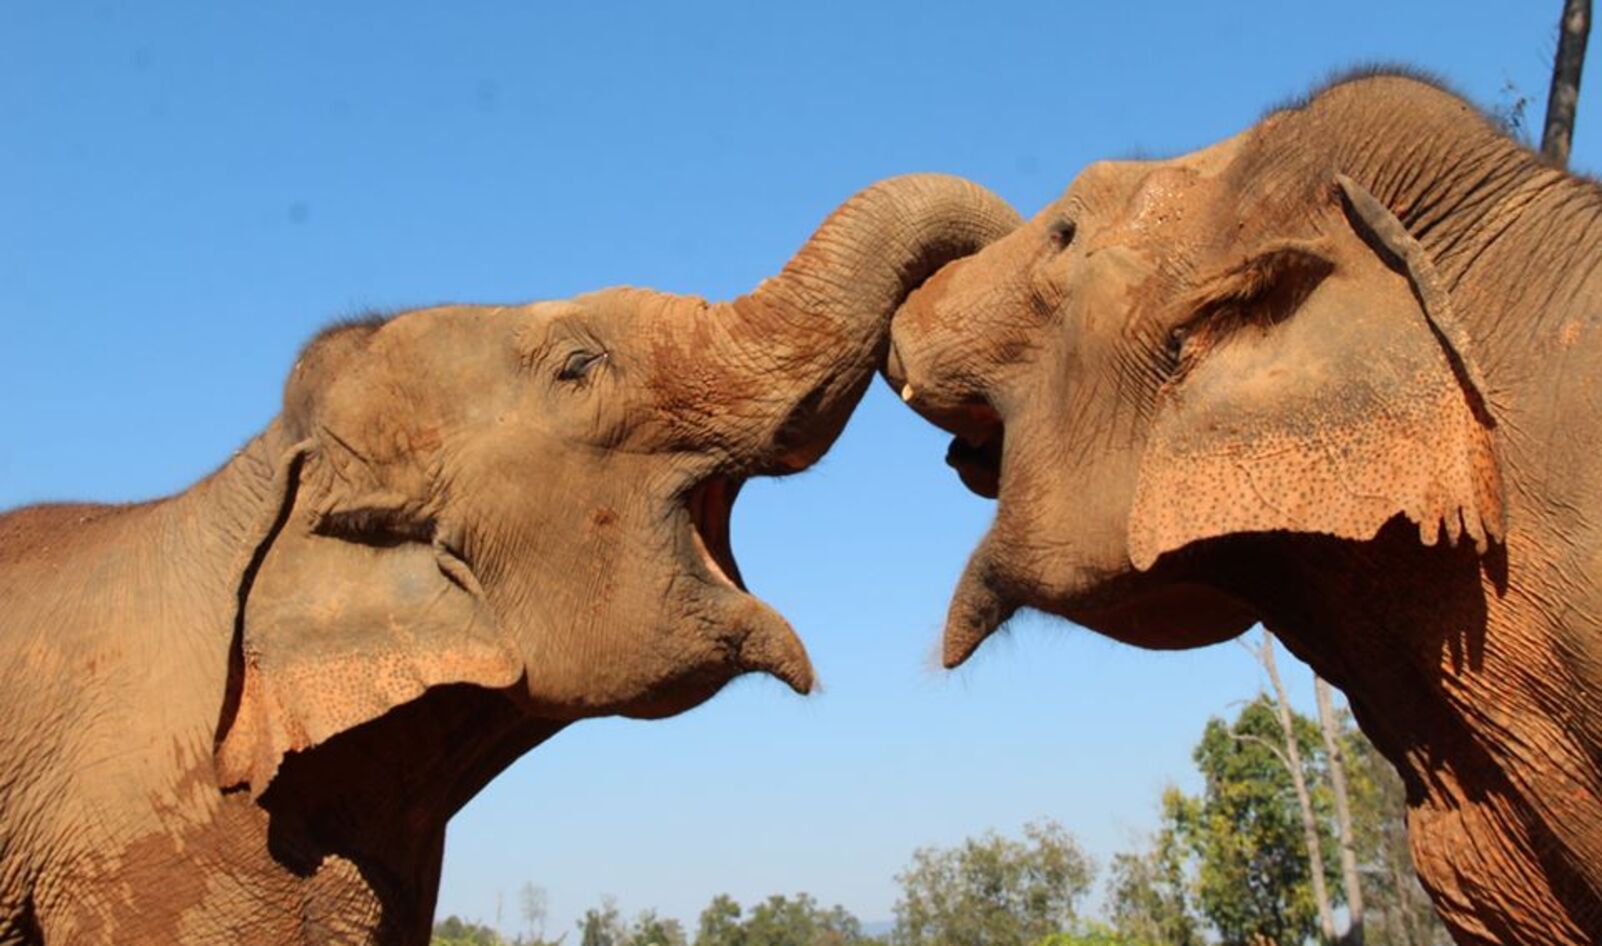 Zoos Urged to Send Elephants to Sanctuaries to Stop Spread of Diseases